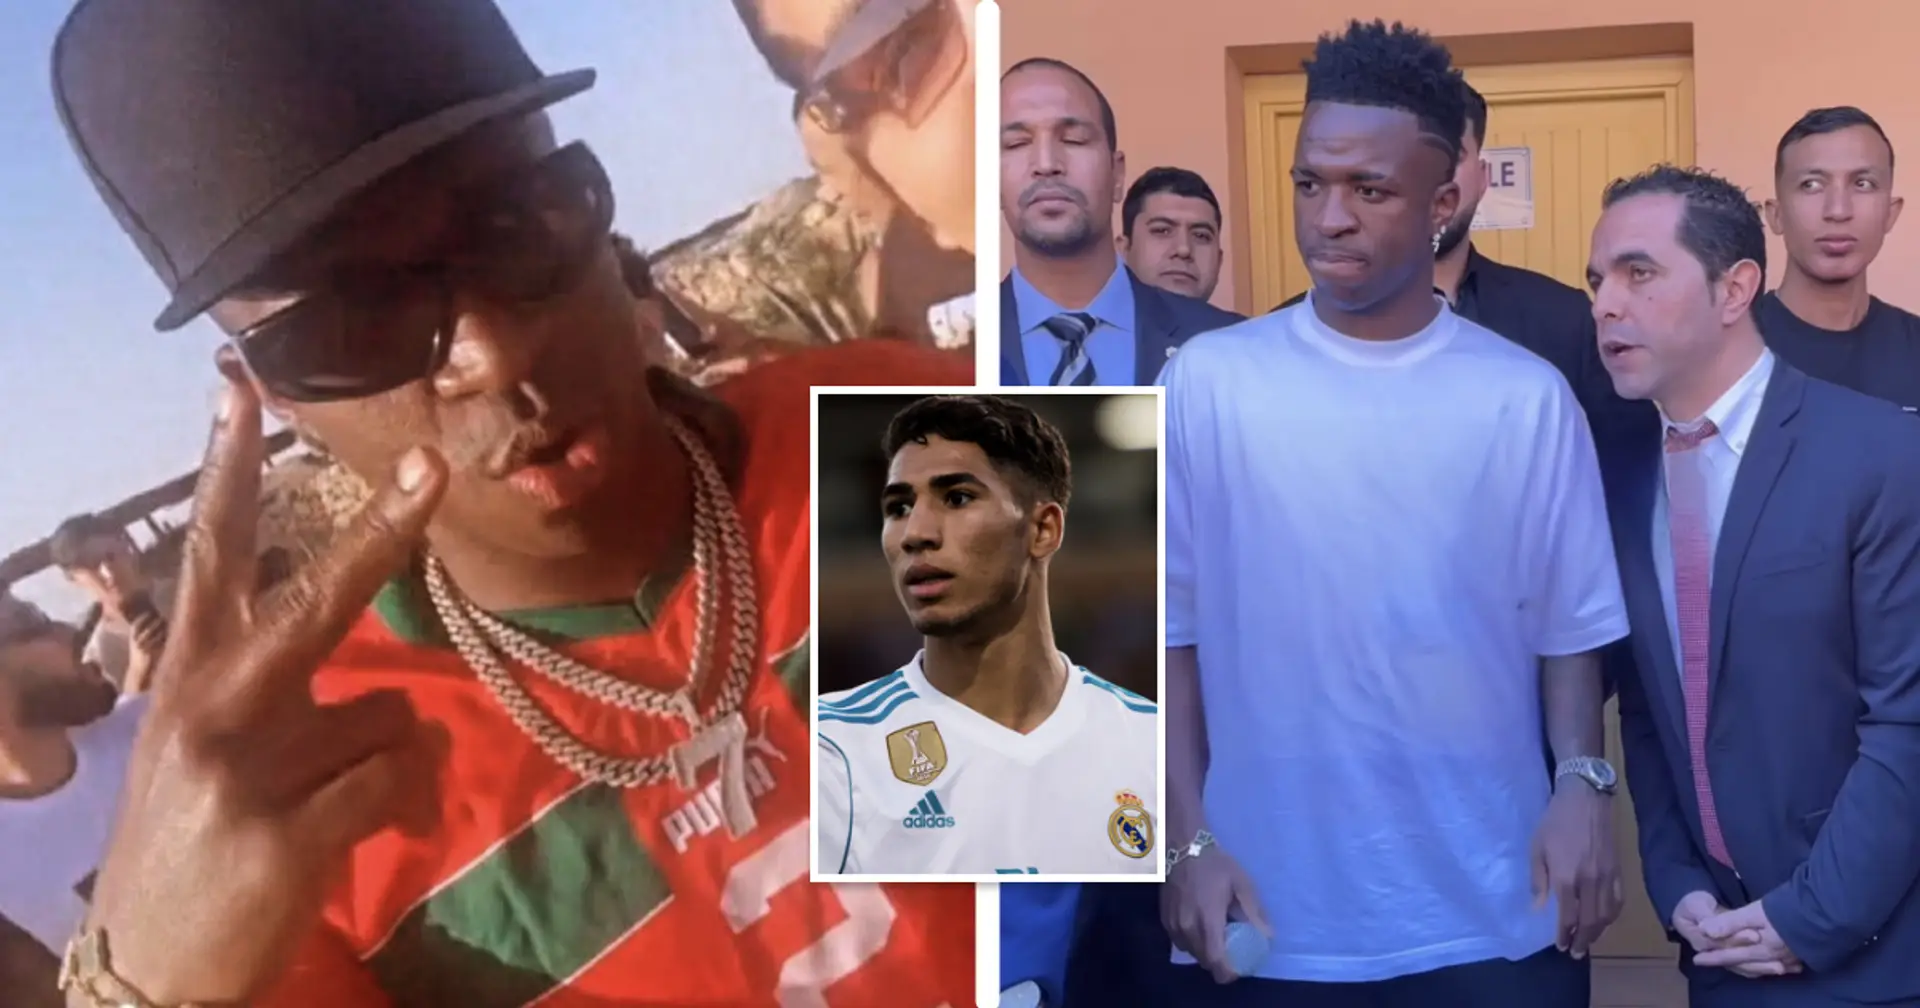 Agent Vini back at it: Brazilian spotted wearing Hakimi jersey in Morocco